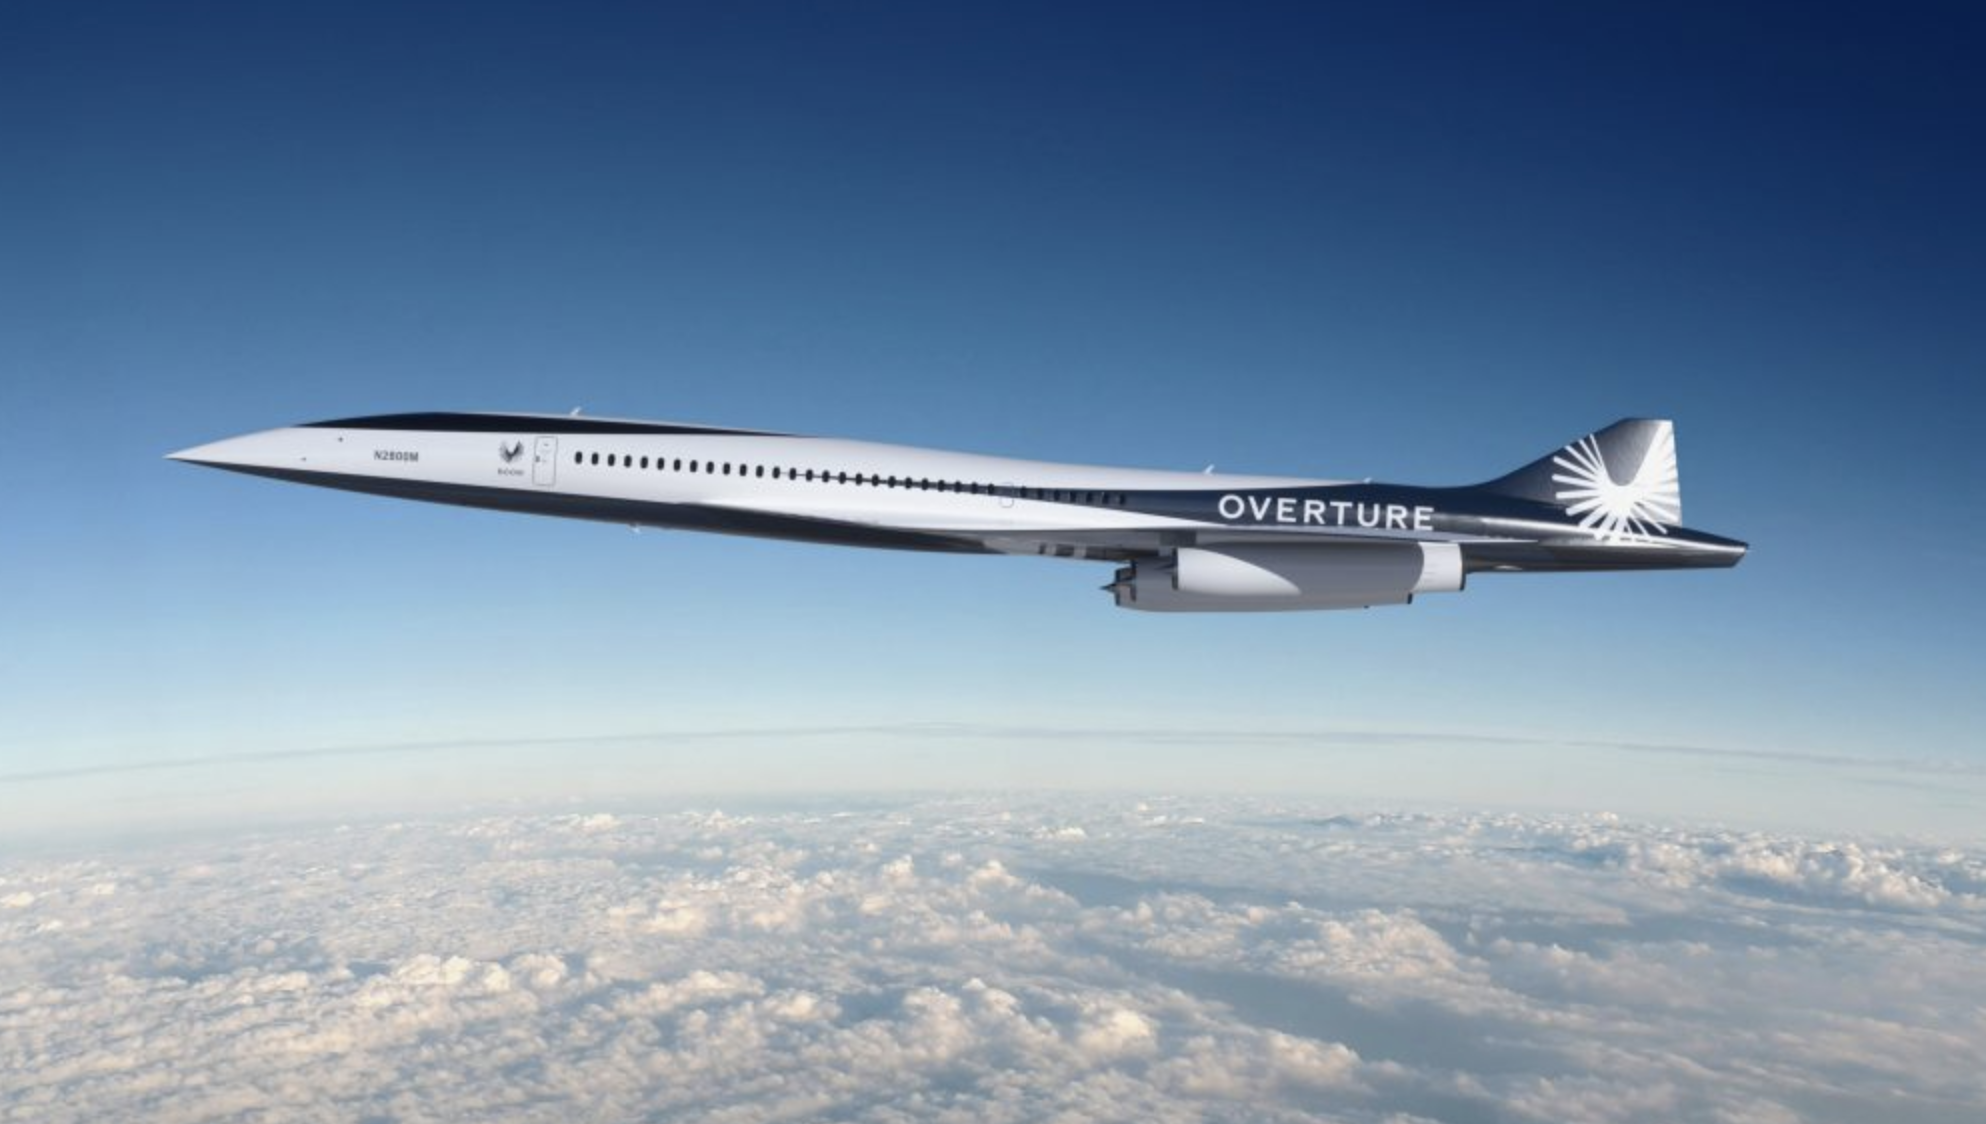 Super-fast Overture jets will soon carry passengers from New York to London  in 3.5 hours